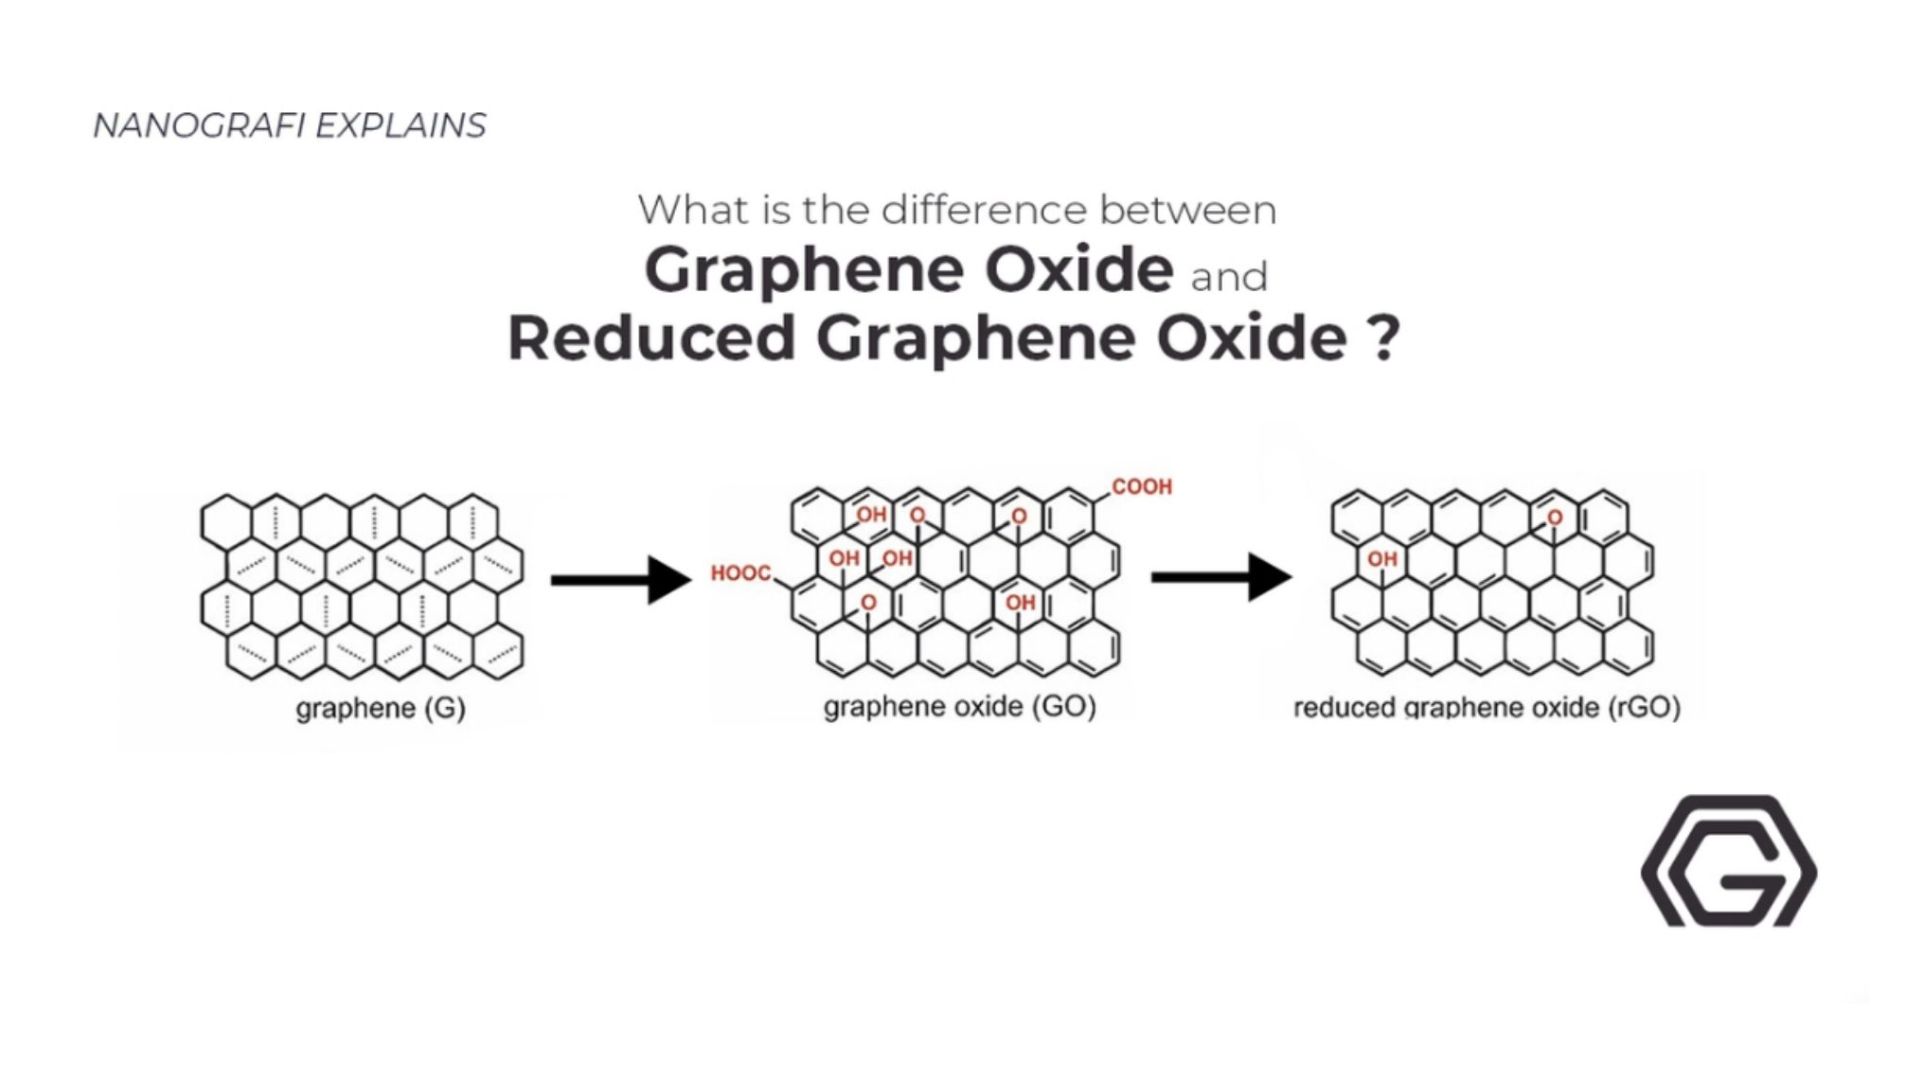 What is the difference between graphene oxide and reduced graphene oxide?